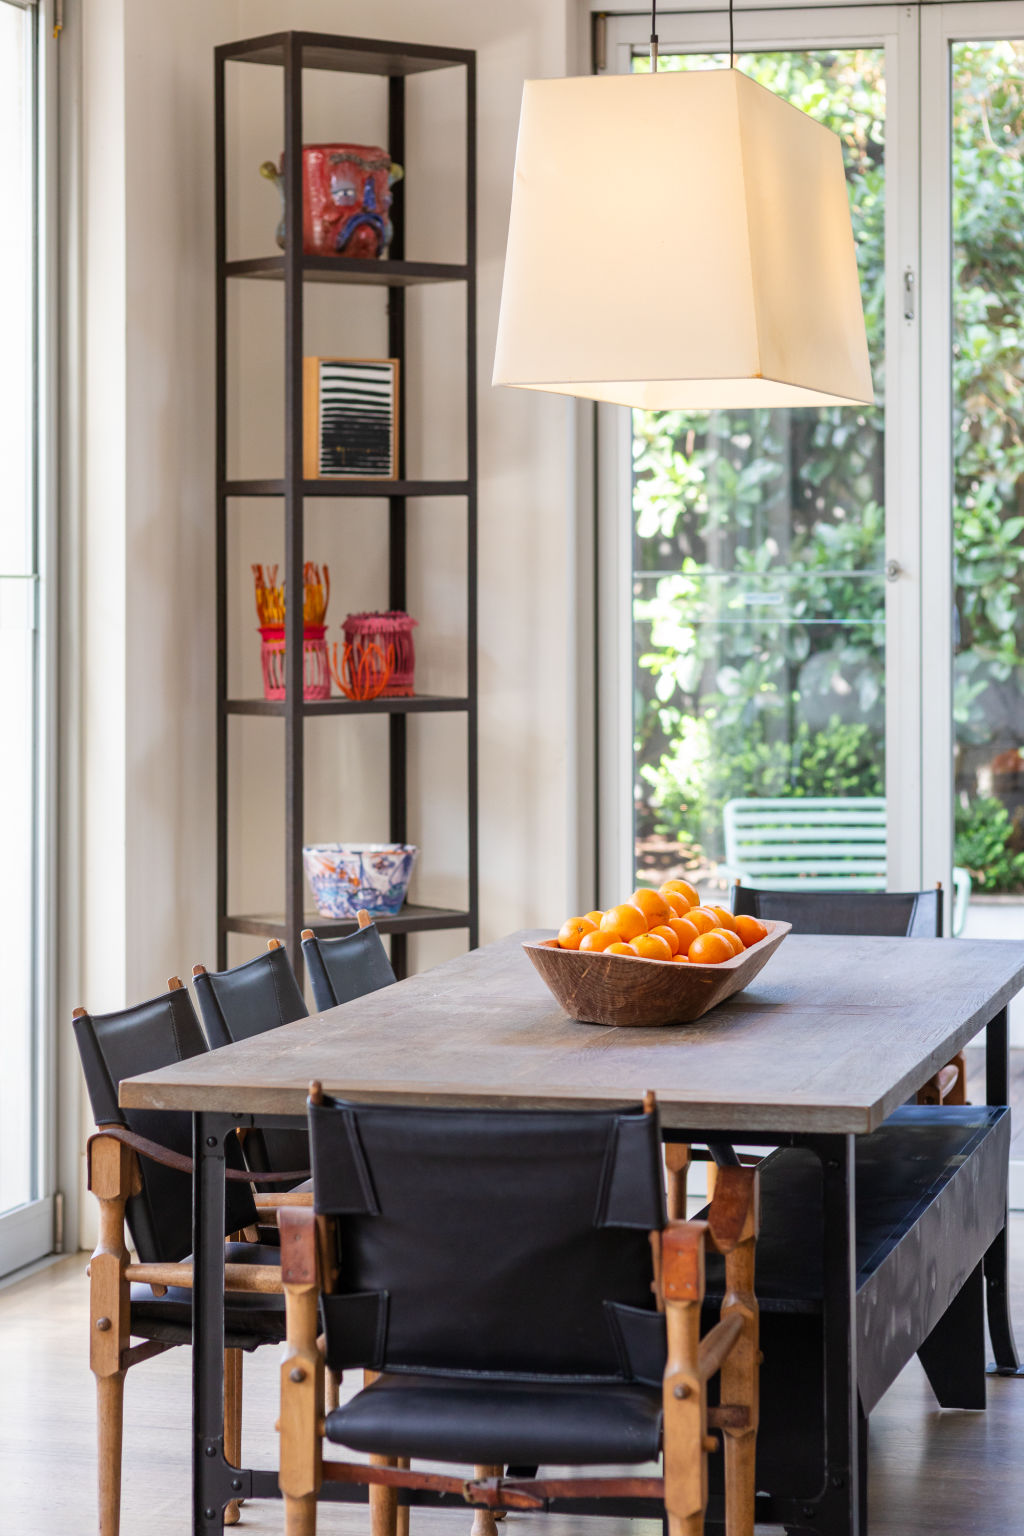 The generous open-plan kitchen, living and informal dining area is wrapped in glass on two sides and washed in natural light. Photo: Greg Briggs